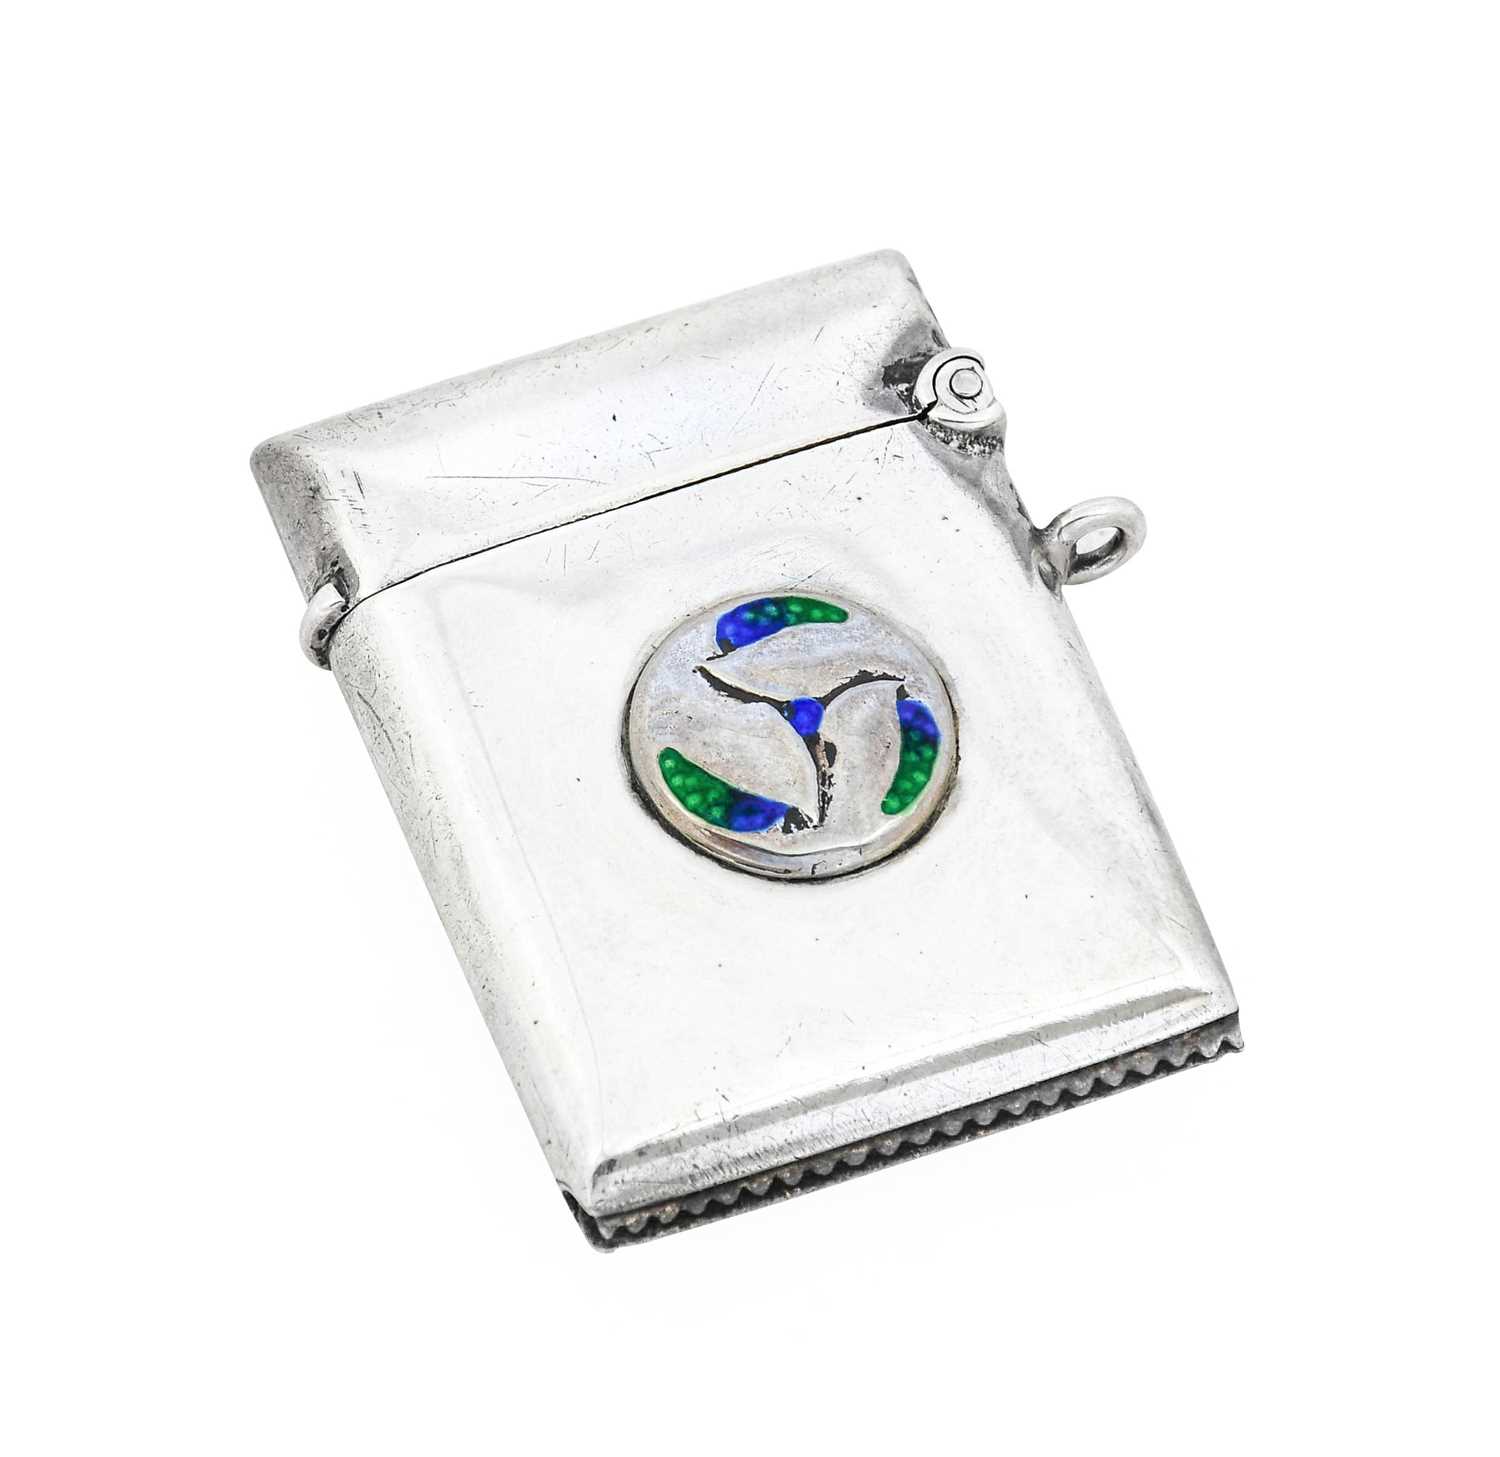 An Arts & Crafts Silver and Enamel Vesta, made by William Hair Haseler, of plain rectangular form